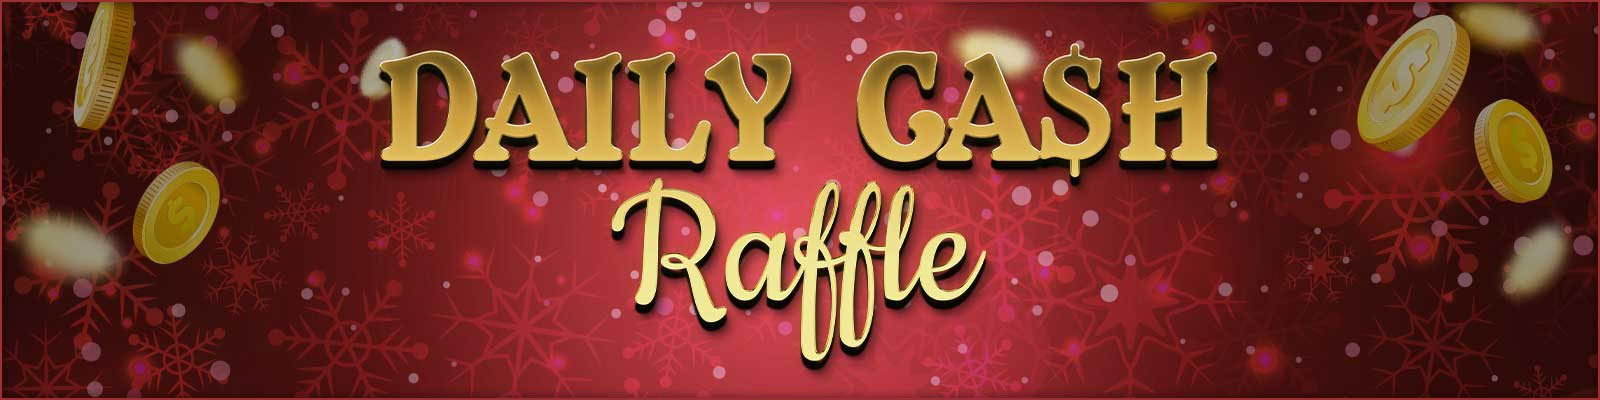 Daily Cash Raffle this month in December! 